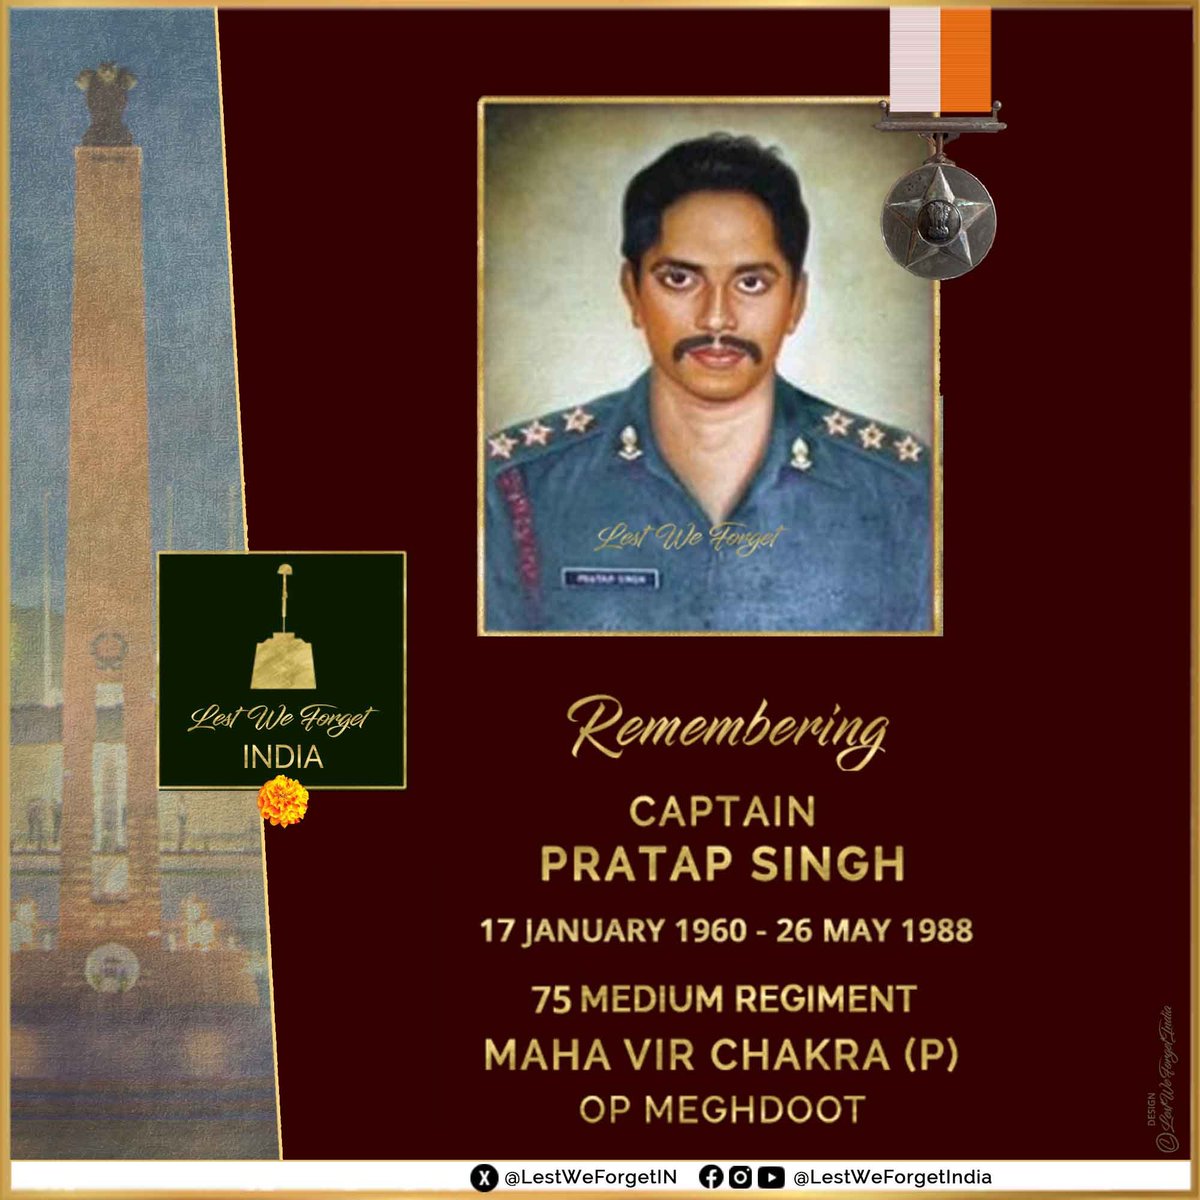 #LestWeForgetIndia🇮🇳 Captain Pratap Singh, Maha Vir Chakra (P), 75 MED REGT laid down his life in action against Pakistan Army #OnThisDay 26 May in 1988 The gallant #IndianBrave scaled an ice wall to safeguard key post at Siachen Glacier- made the supreme sacrifice for the